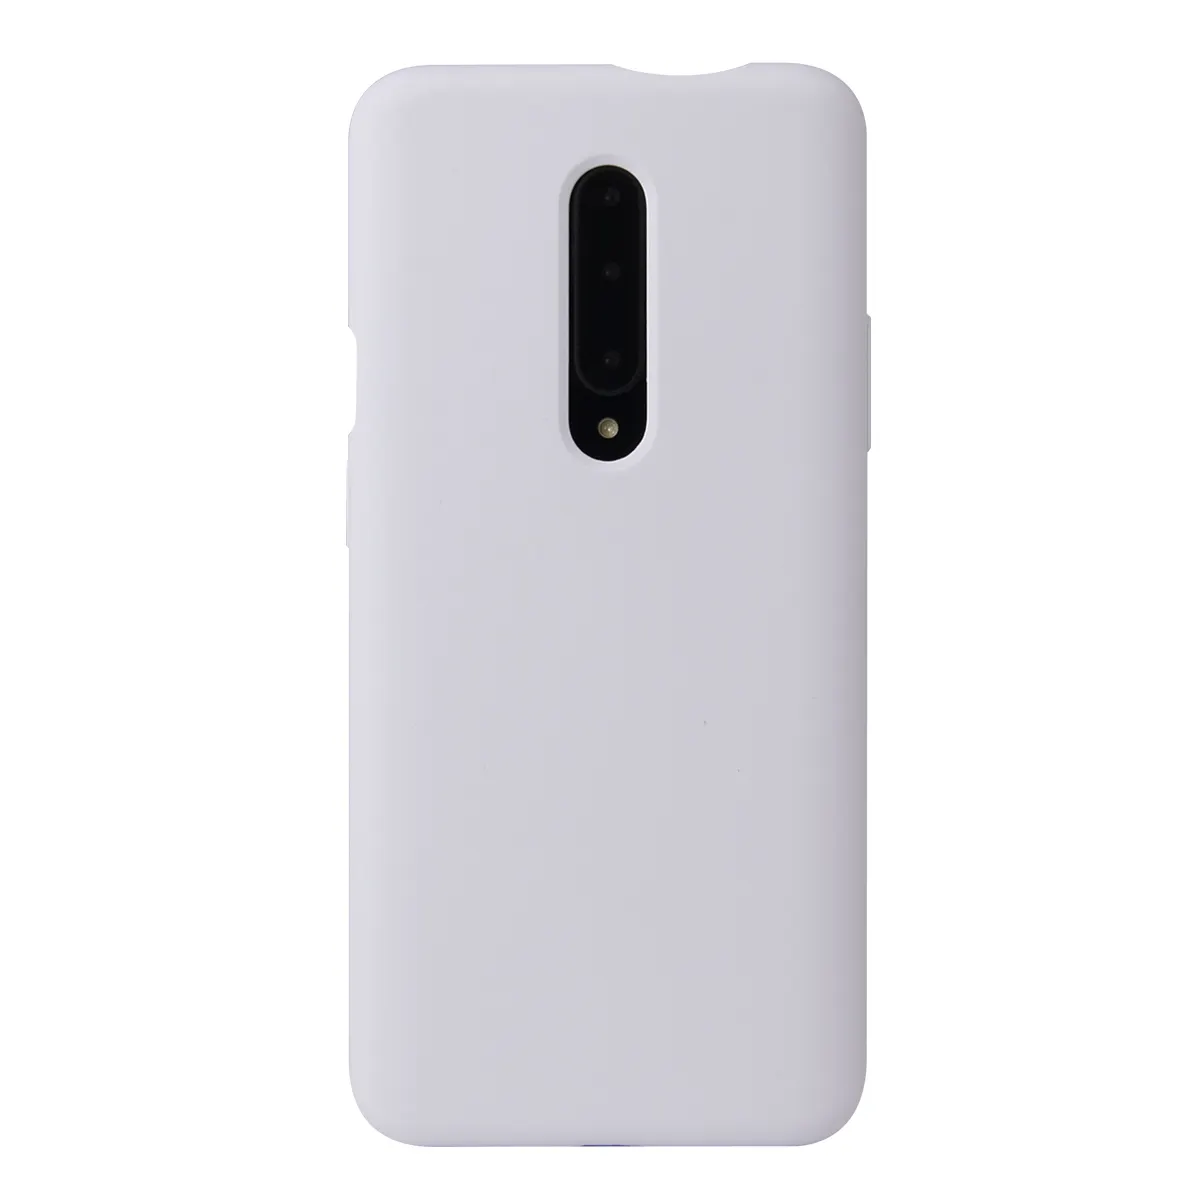 Wholesale waterproof silicone mobile phone case soft shockproof case for Oneplus1+7 pro mobile phone